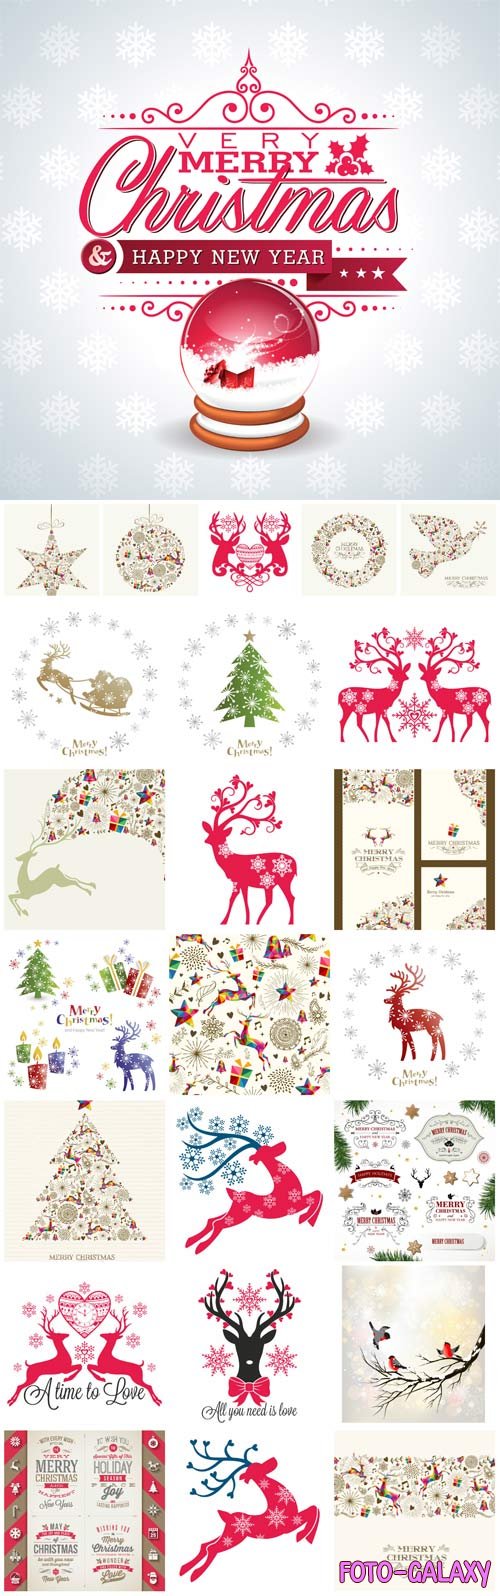 Christmas vector with reindeer and winter decor